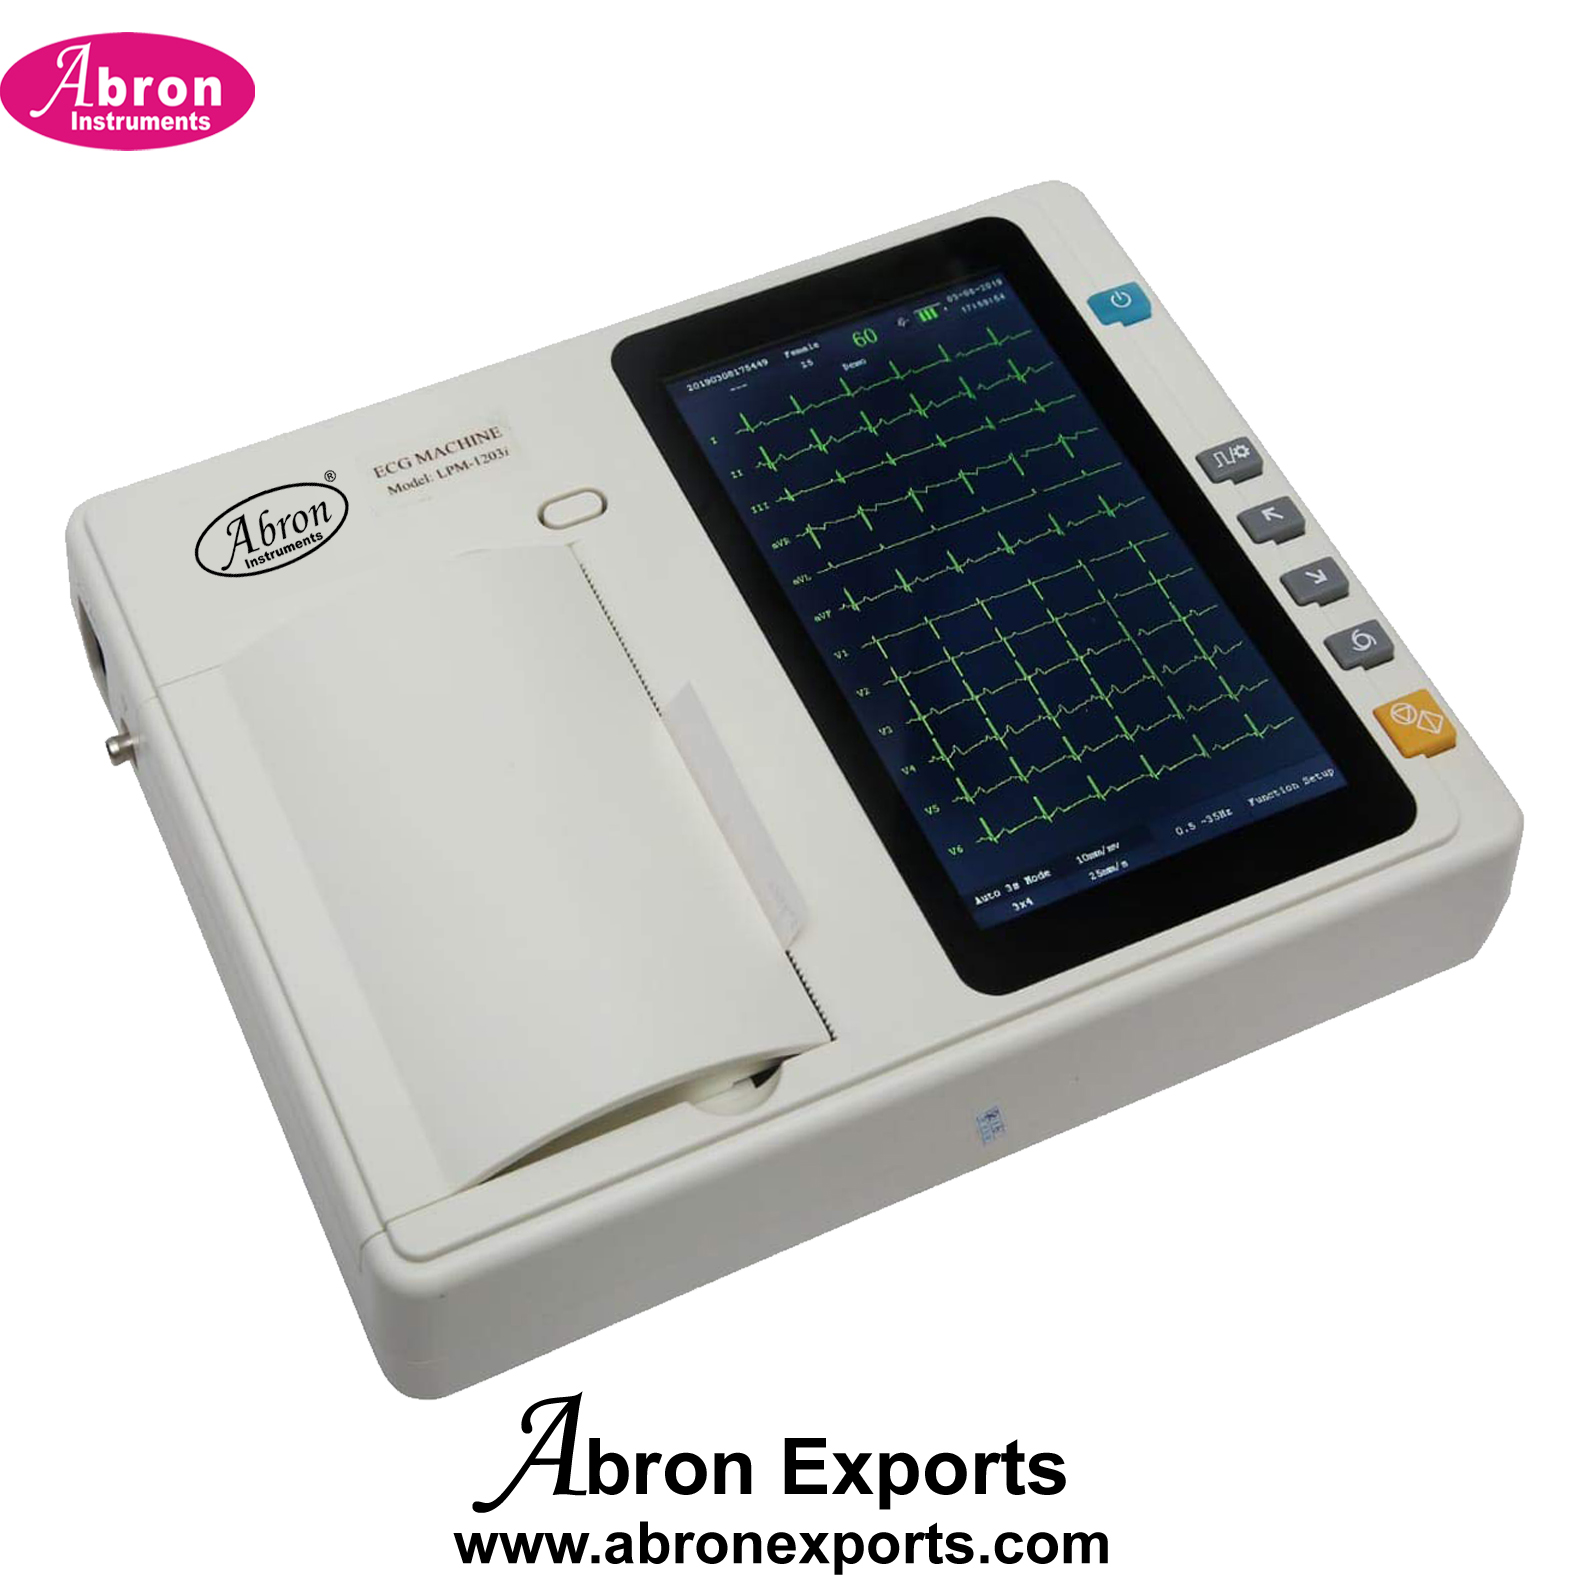 ECG machine 3 Channels Electrocardiogram with wires Hospital Medical Nursing Home Clinic Abron ABM-2101A03L 